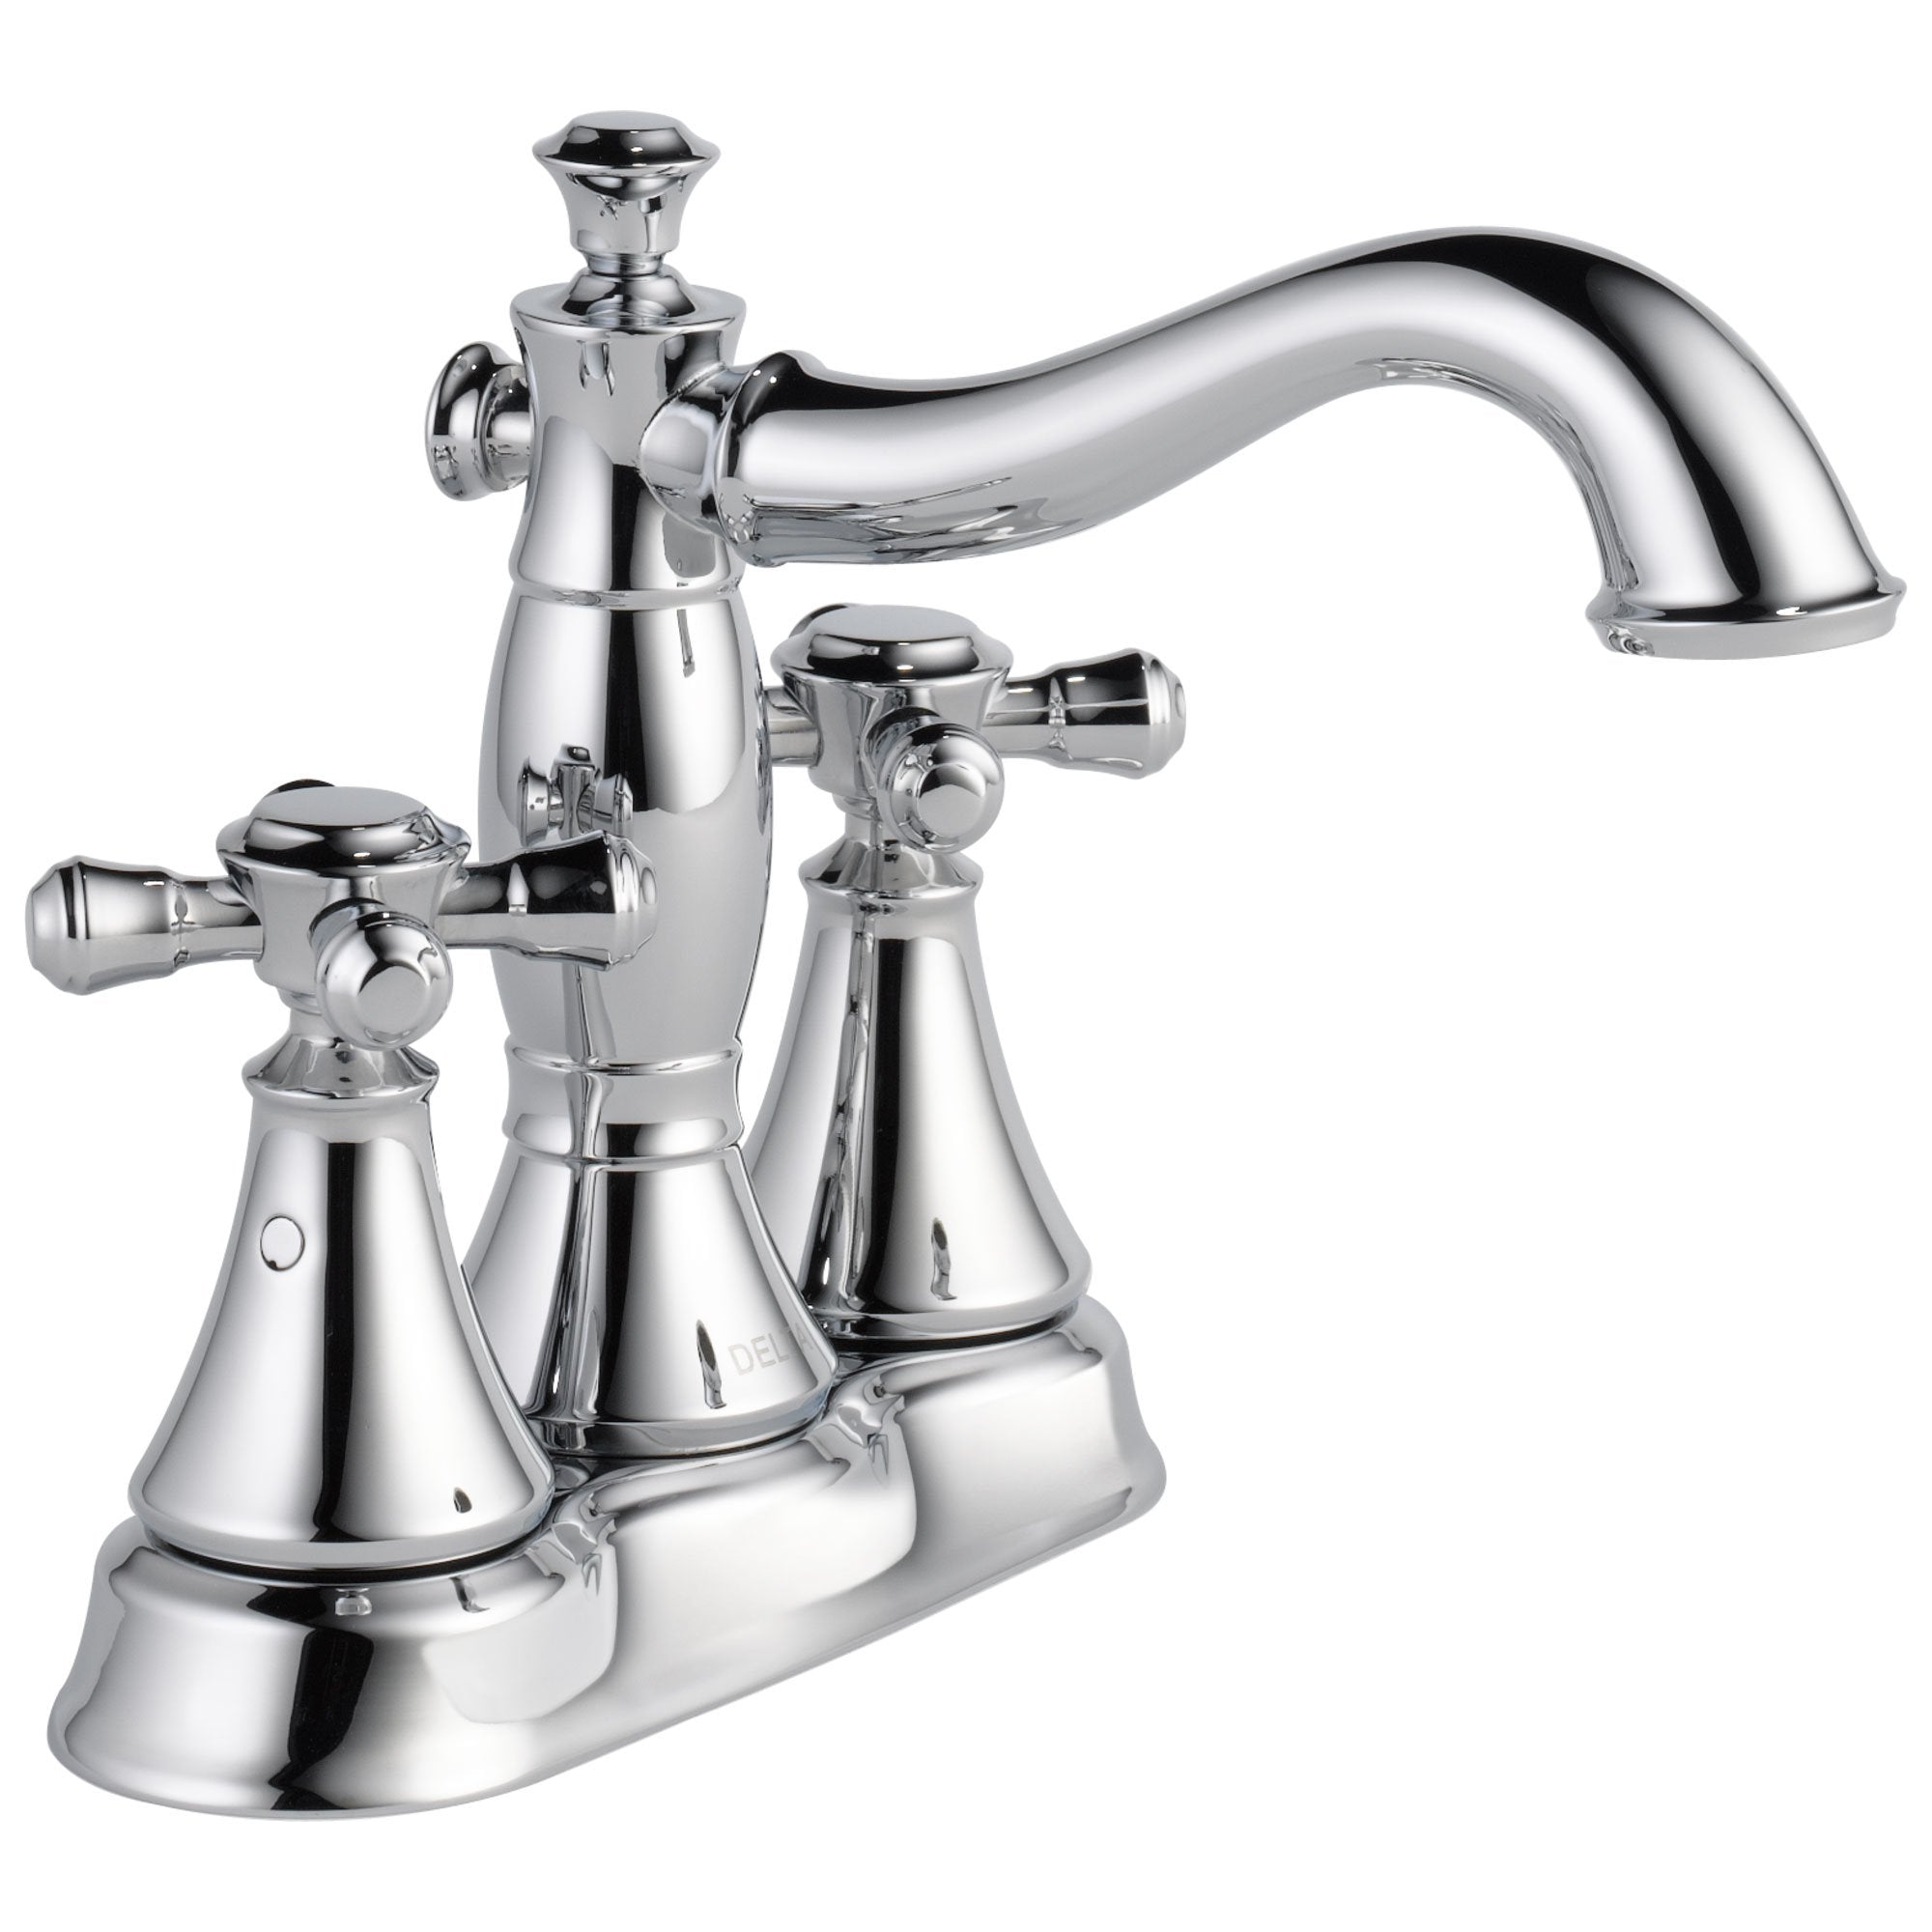 Delta Cassidy Collection Chrome Finish 4" Centerset Lavatory Bathroom Faucet INCLUDES Two Cross Handles and Metal Pop-Up Drain D1810V